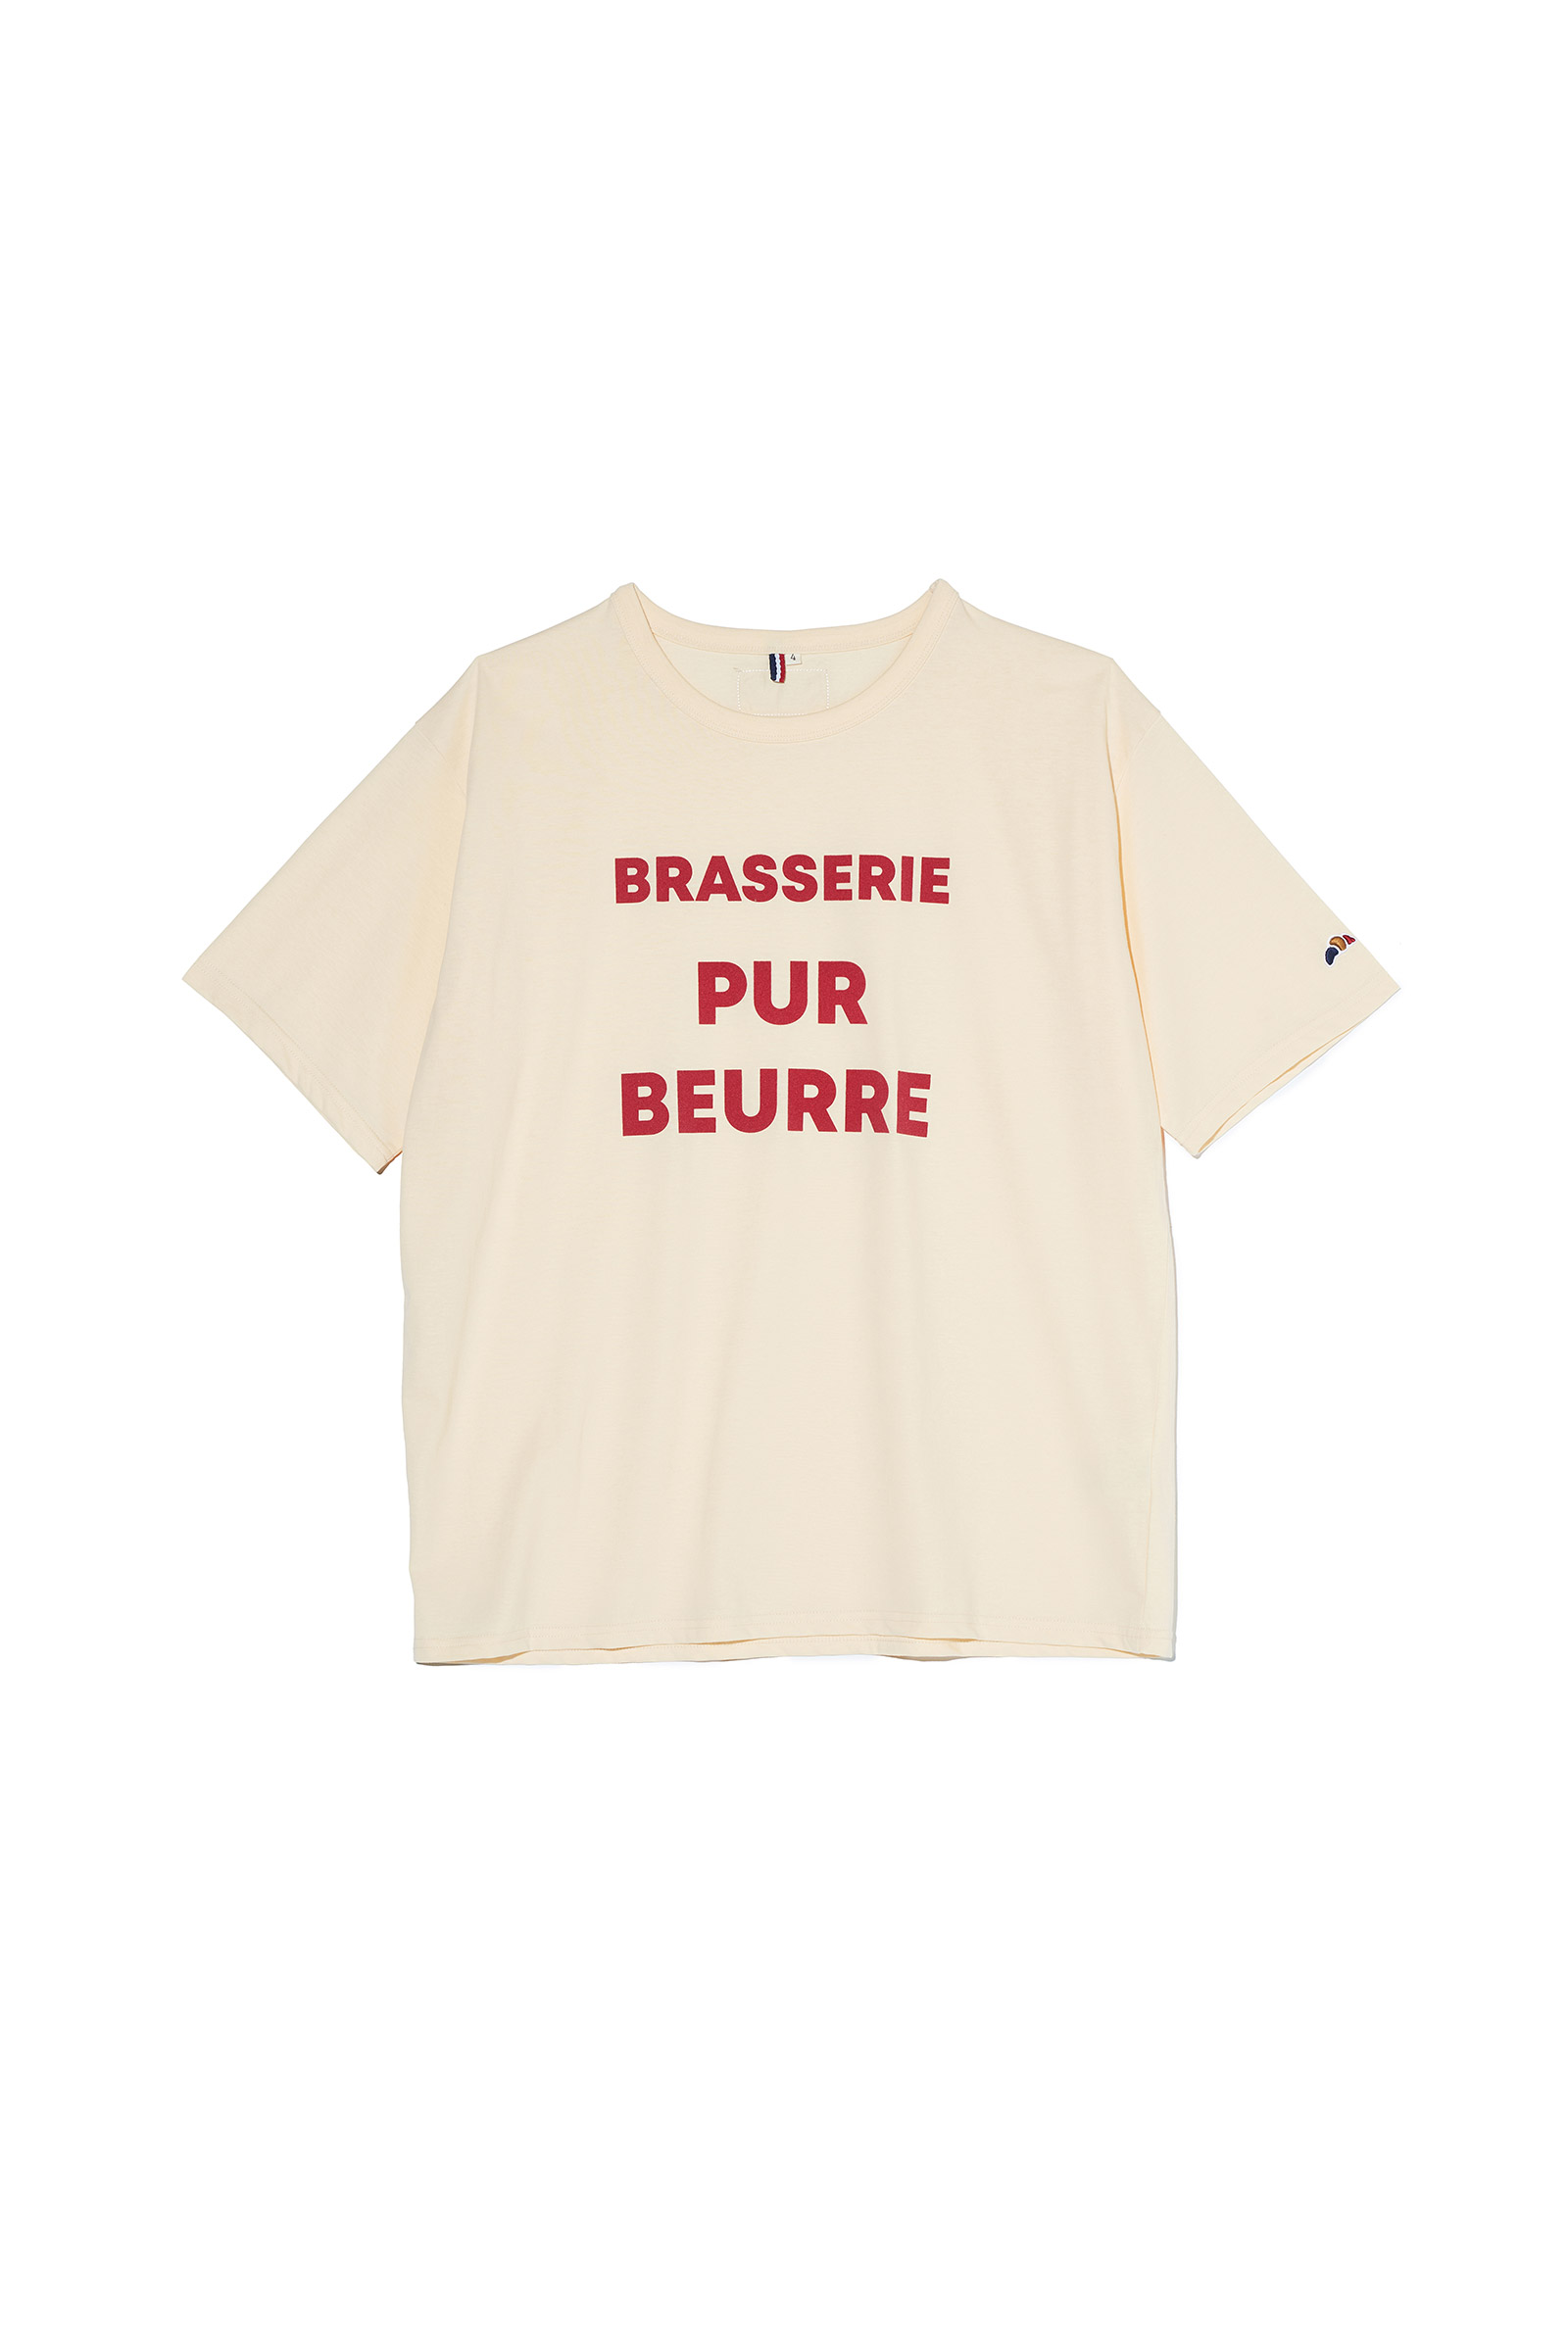 ep.4 Pur Beurre T-shirts (Ivory)